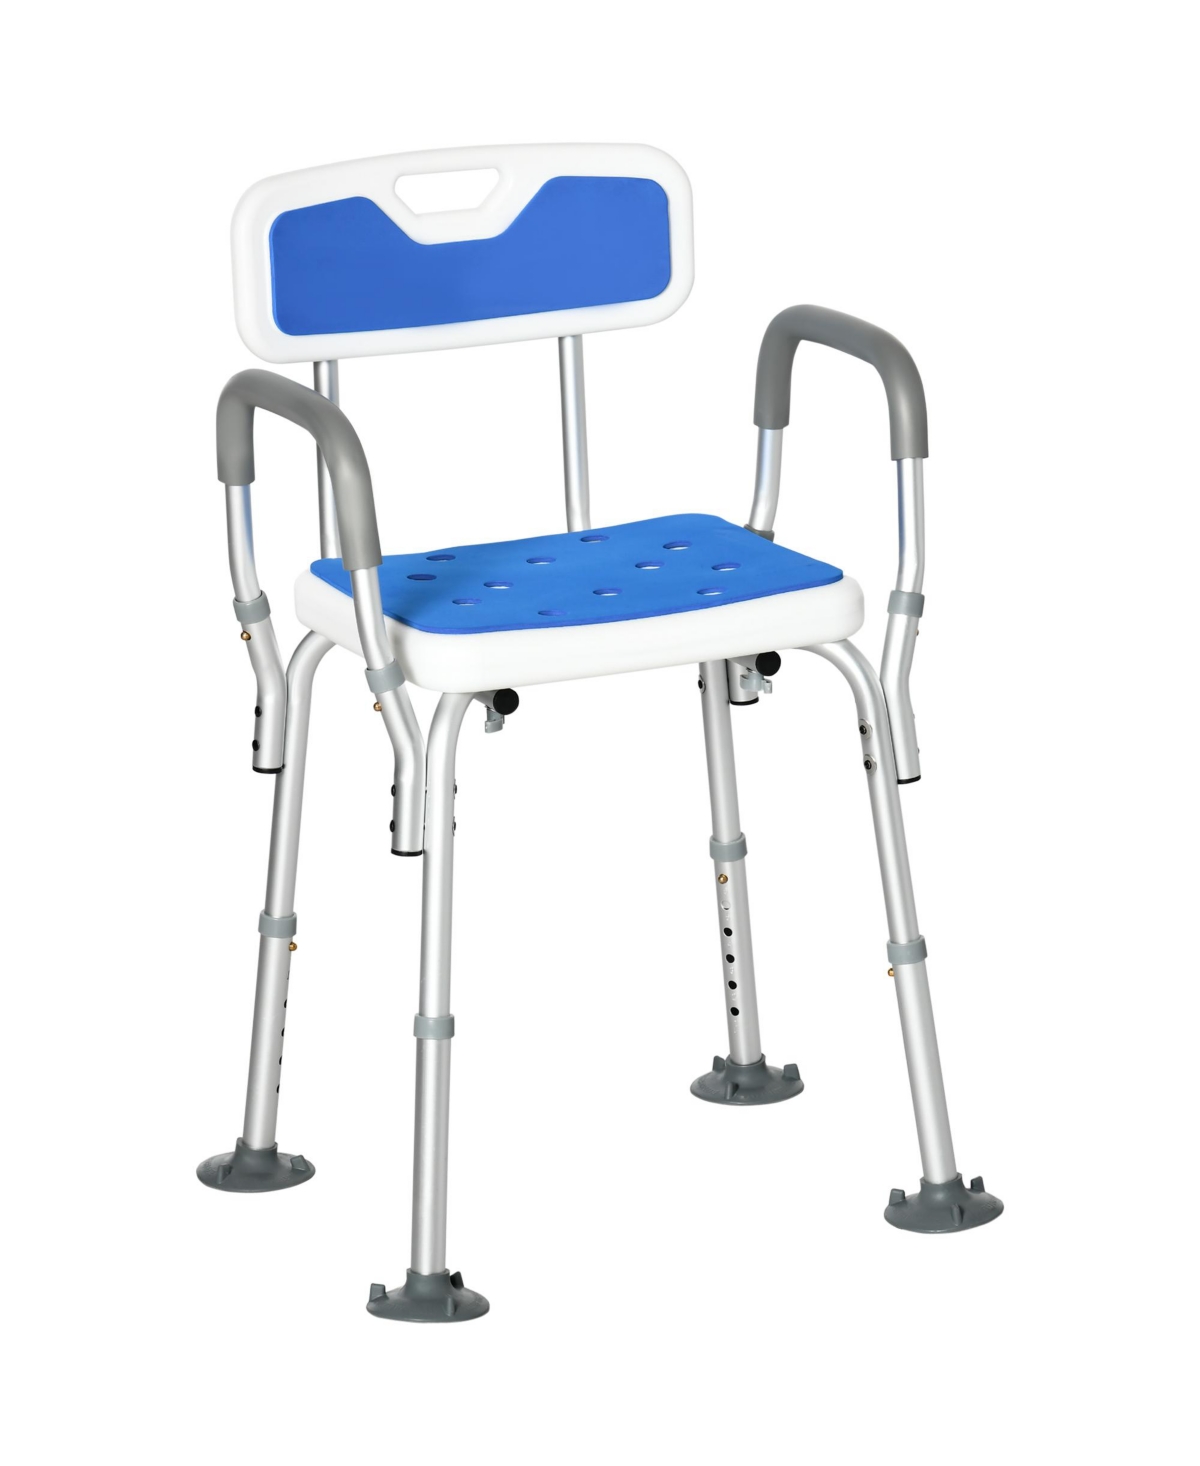 Eva Padded Shower Chair with Arms and Back, Bath Seat with Adjustable Height, Anti-slip Shower Bench for Seniors and Disabled, Tool-Free Assemb